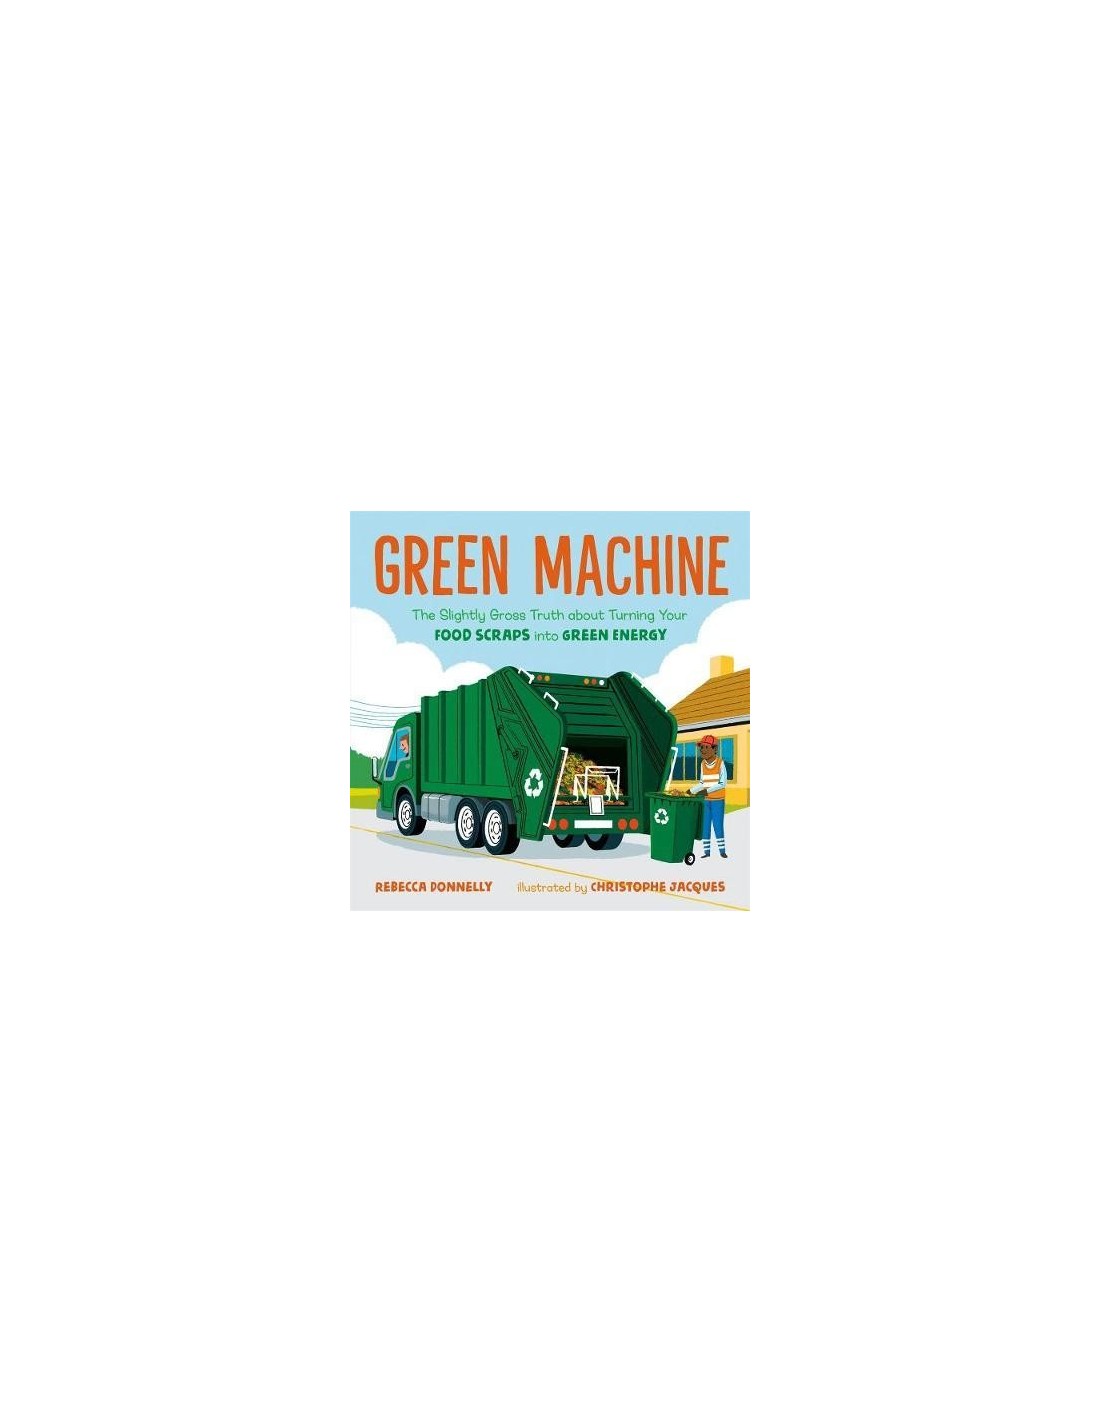 Green Machine : The Slightly Gross Truth About Turning Your Food Scraps into Green Energy